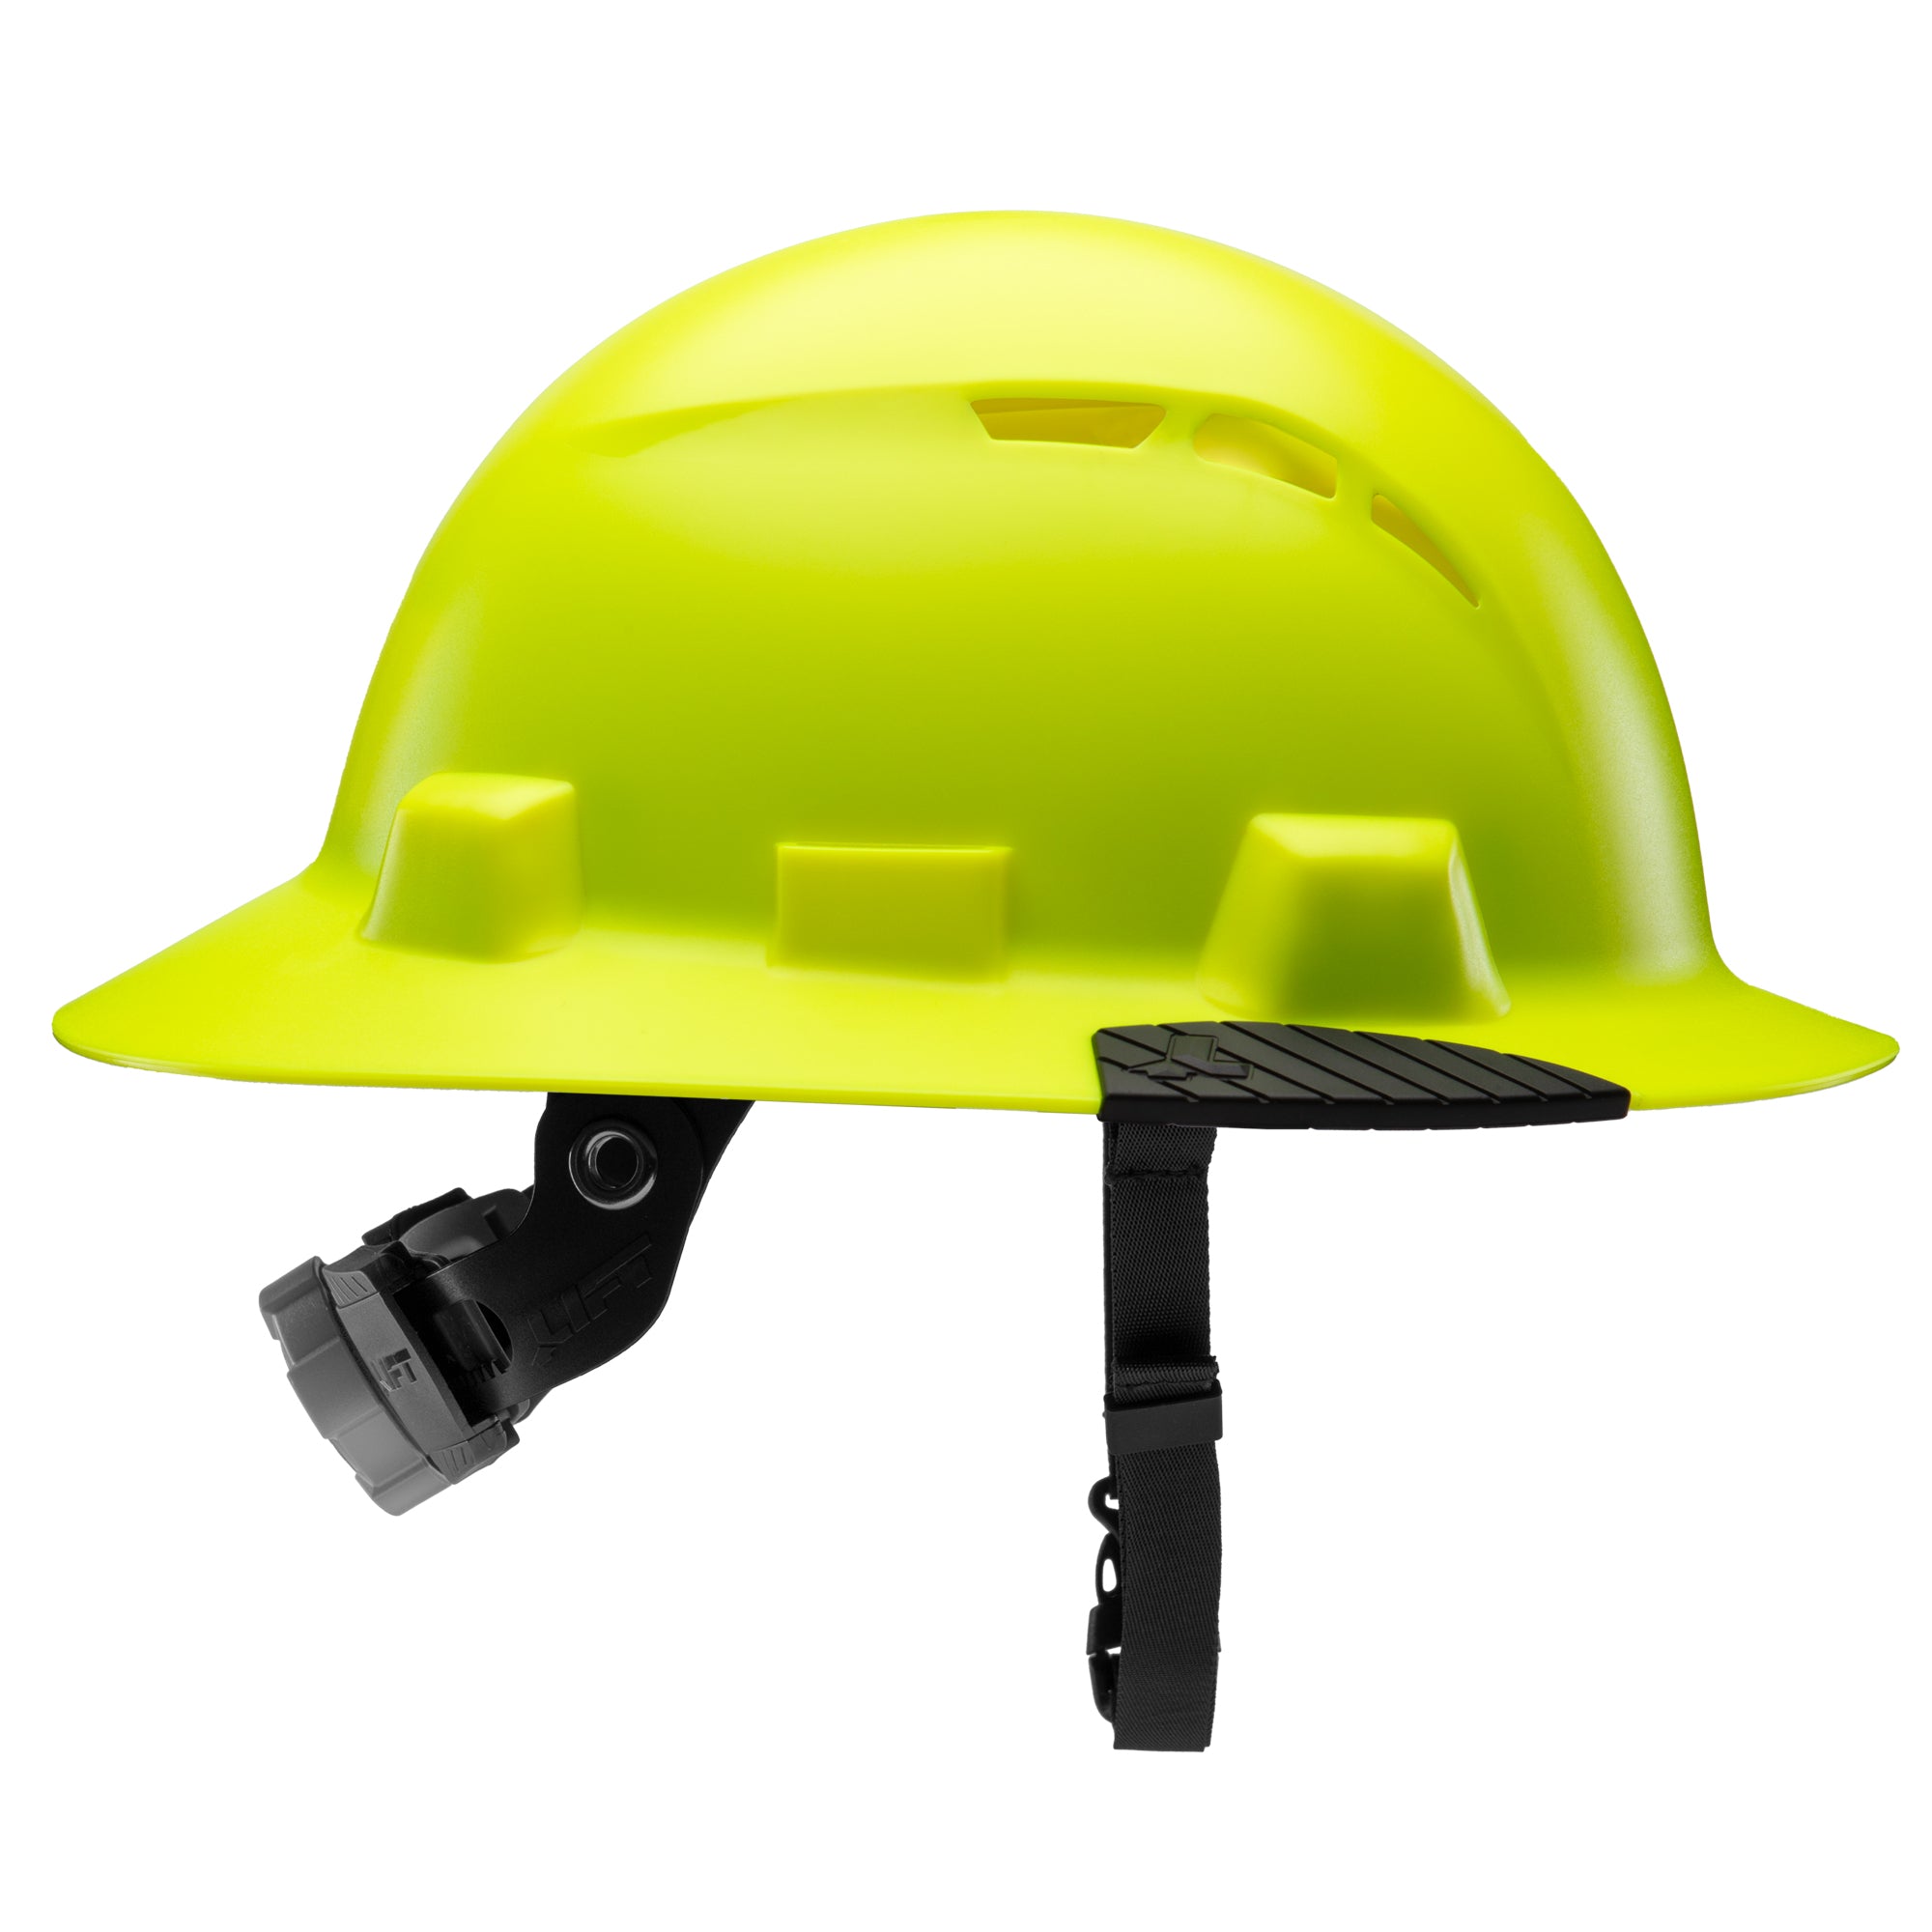 iDAX - Vented Hard Hat | LIFT Safety